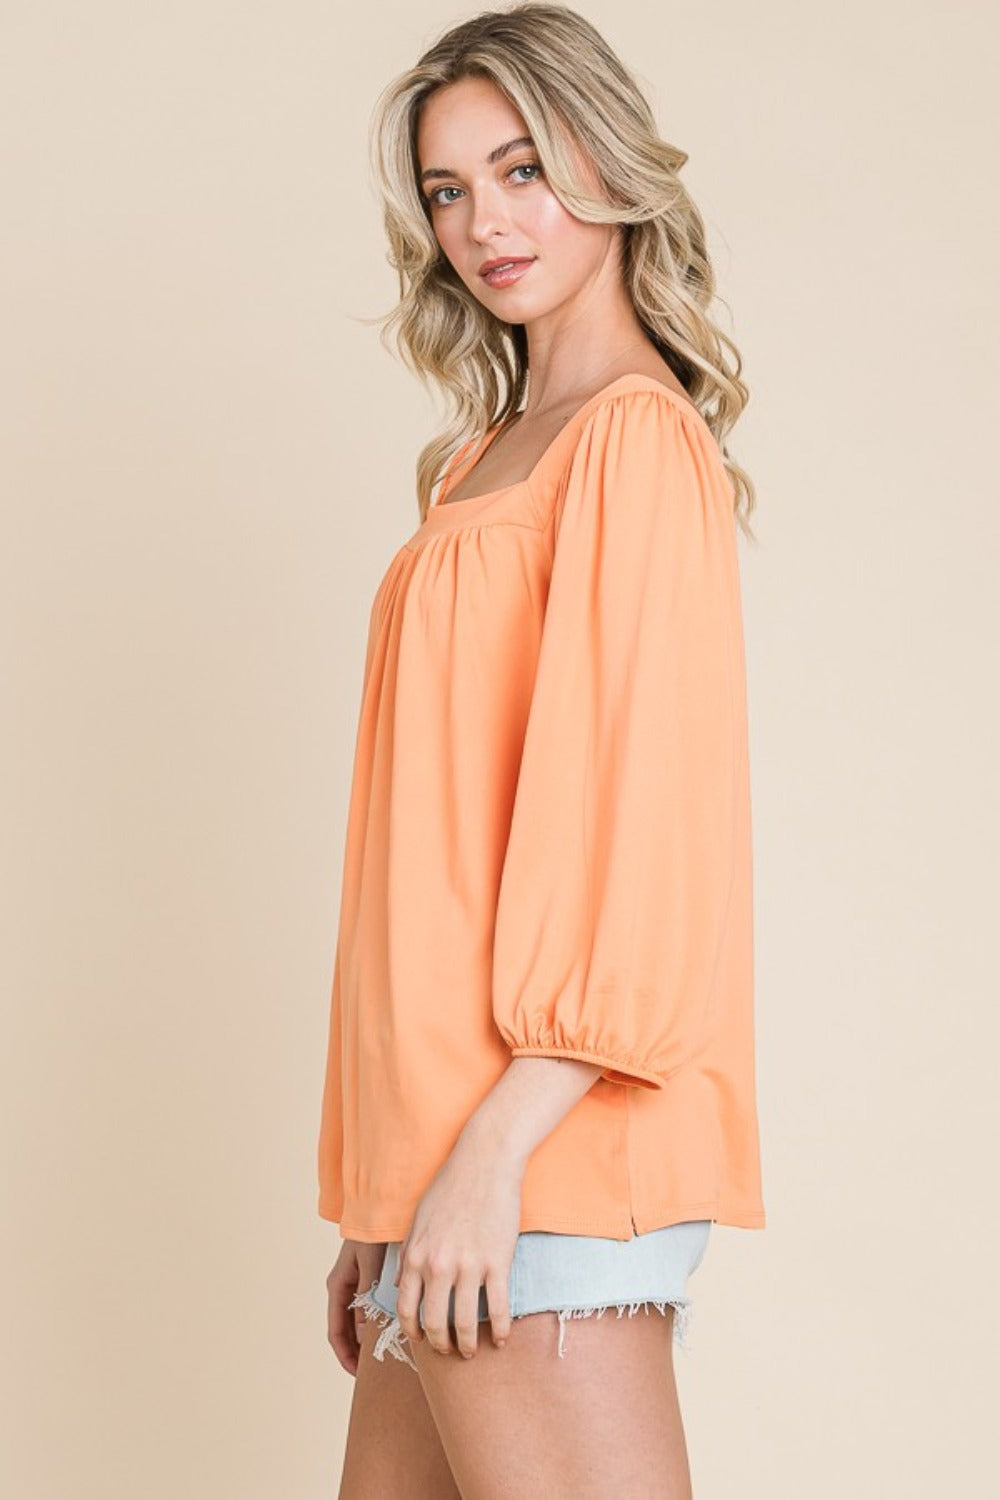 Culture Code Square Neck Puff Sleeve Top Dresses & Tops